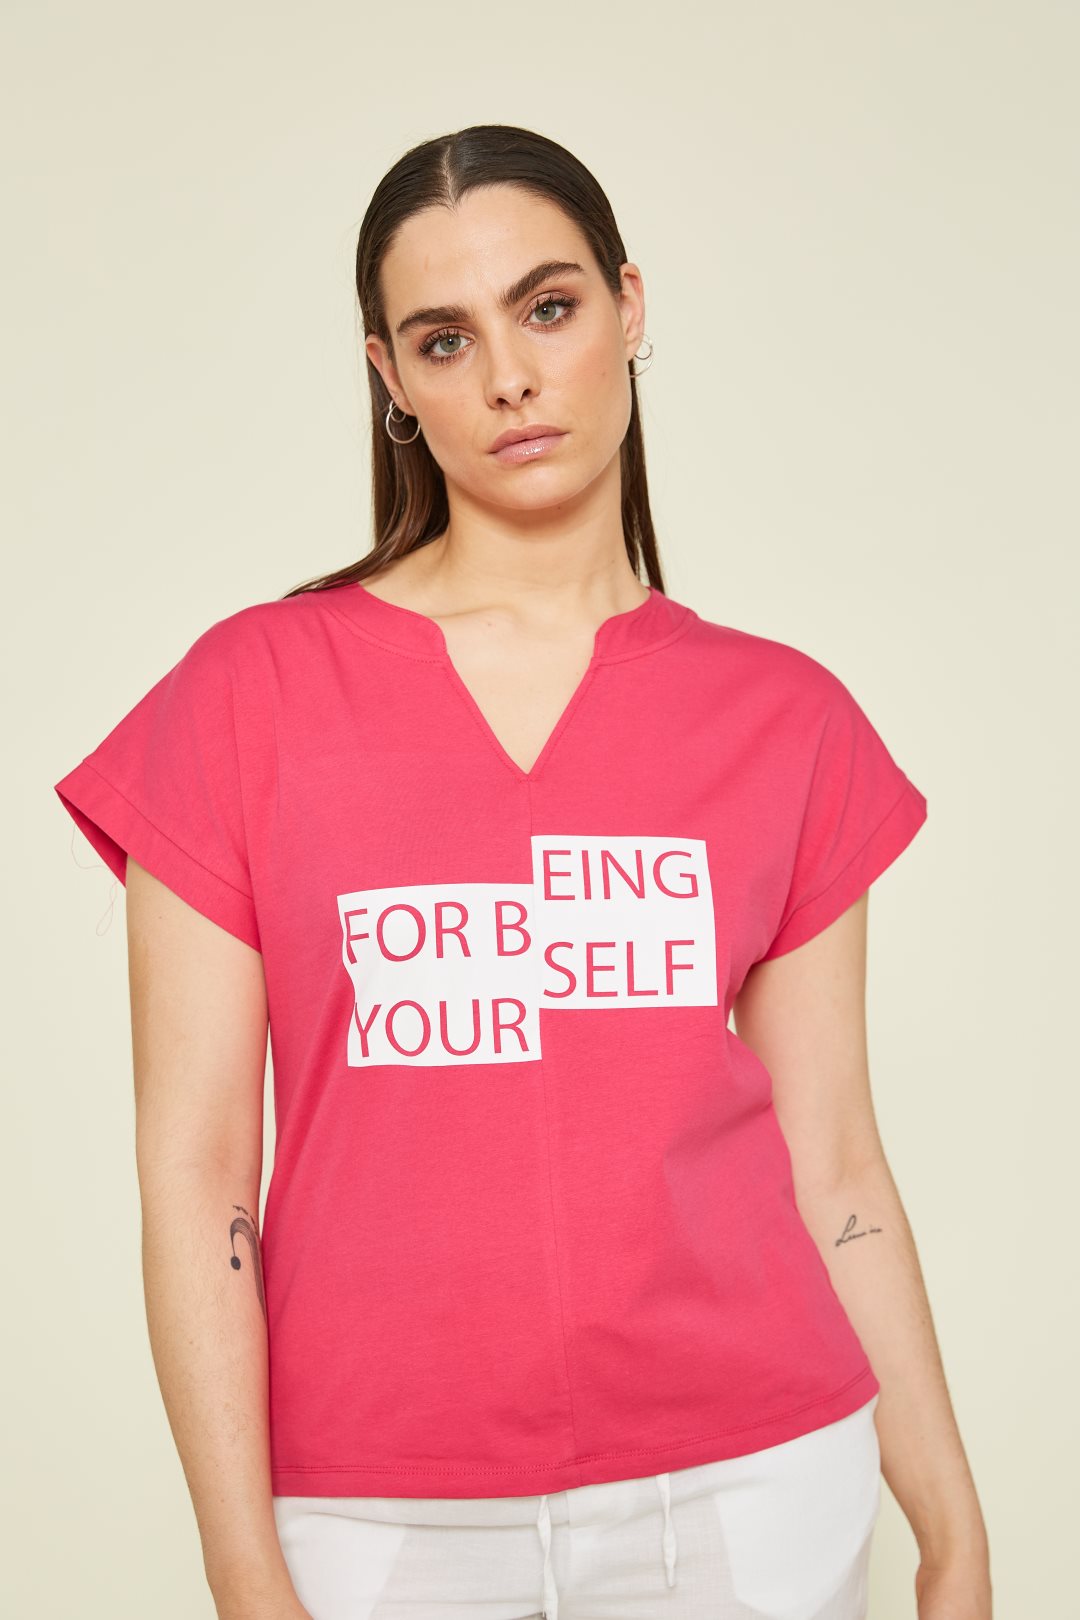 For being yourself t-shirt